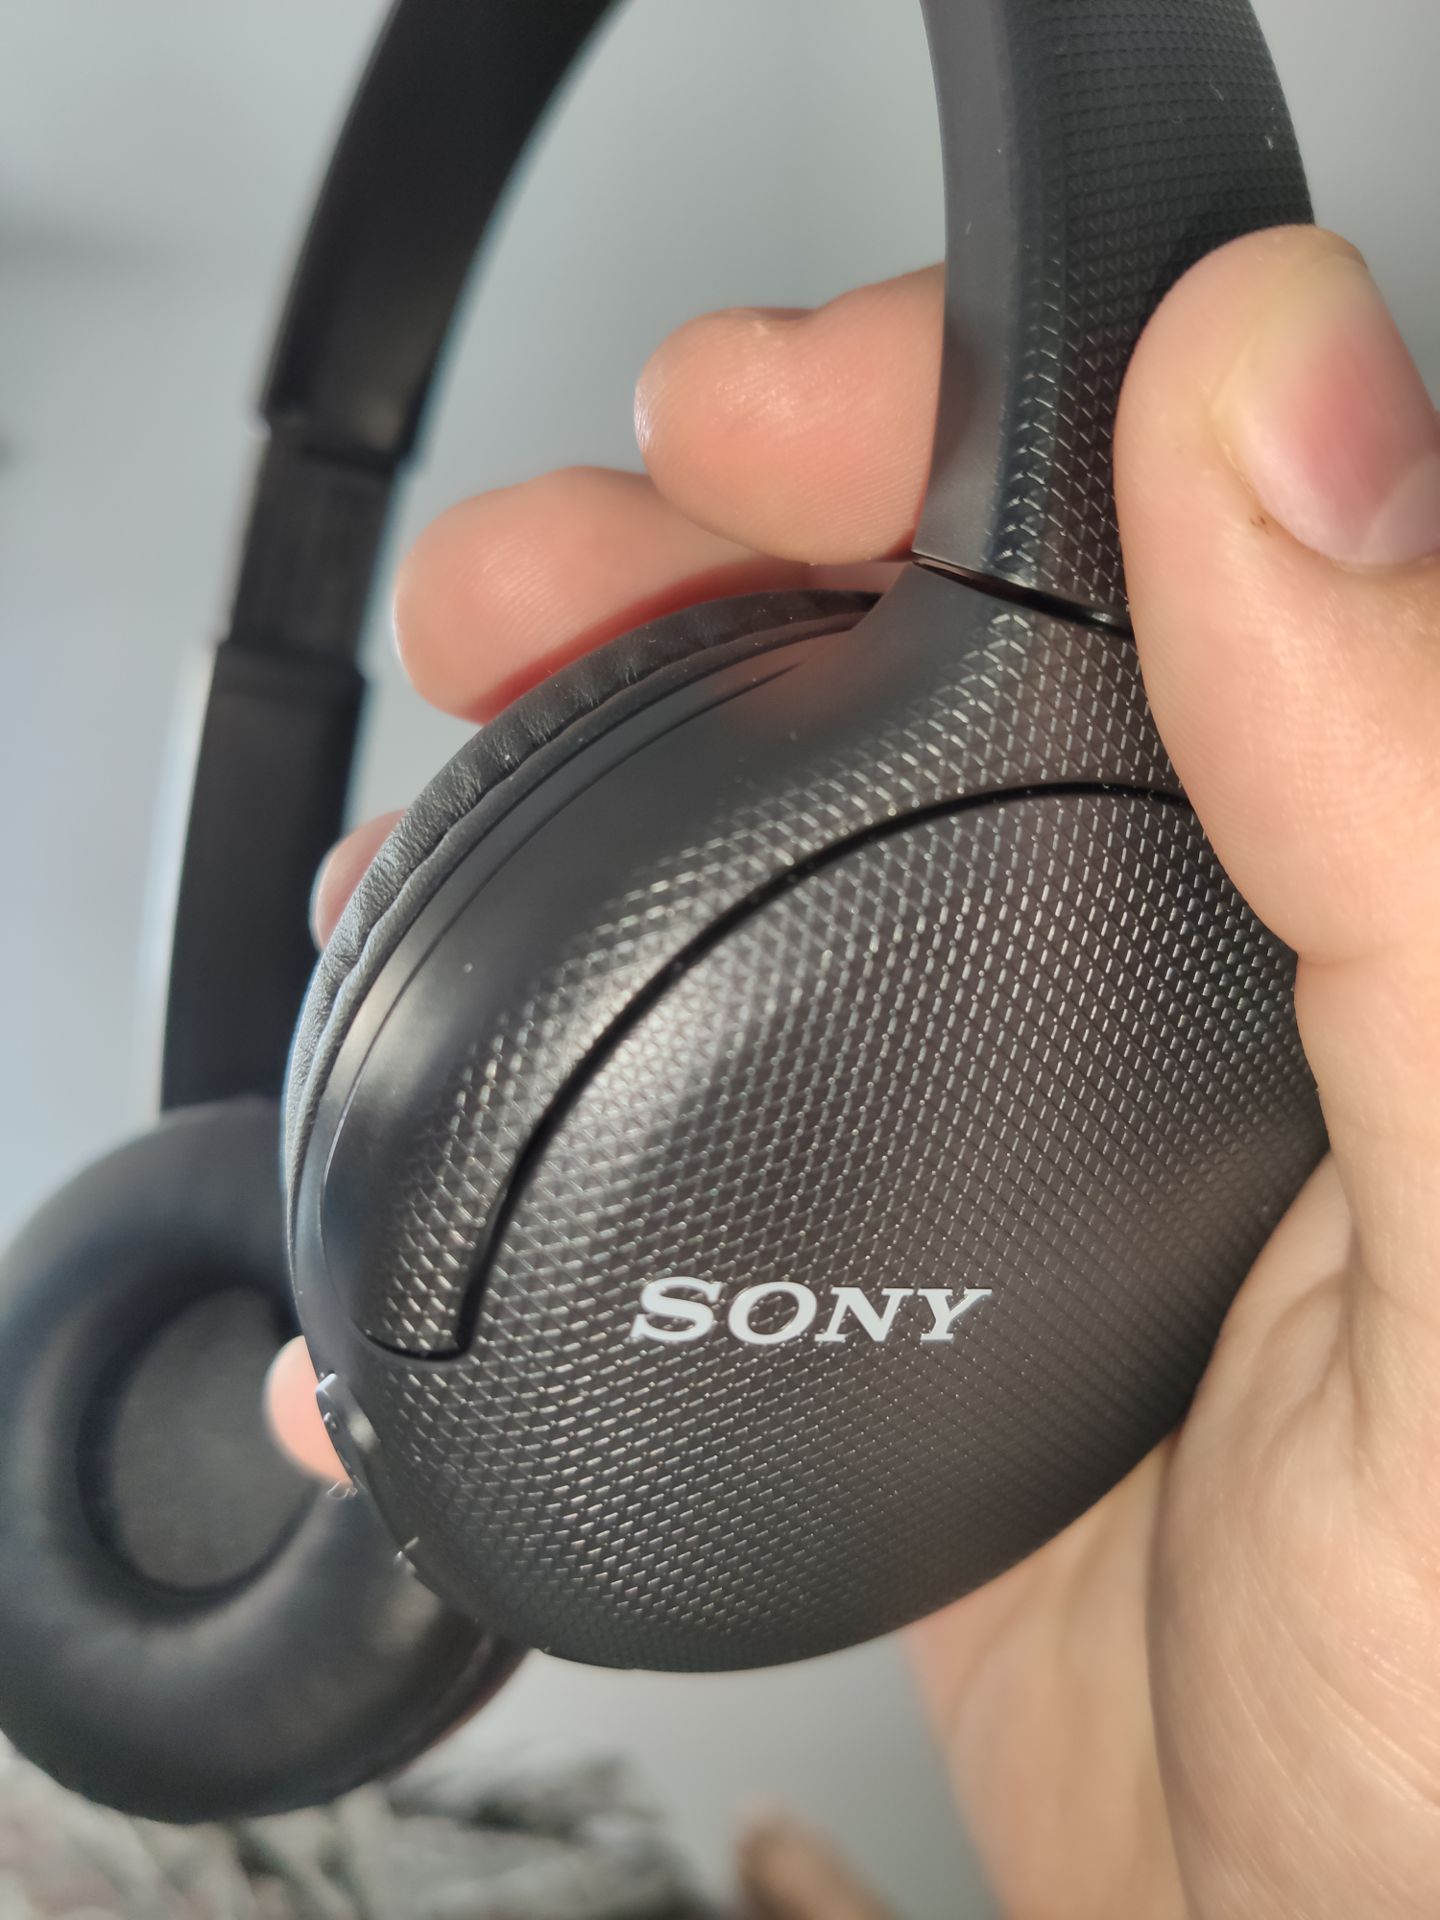 SONY WH-CH510 - Good enough wireless headphones